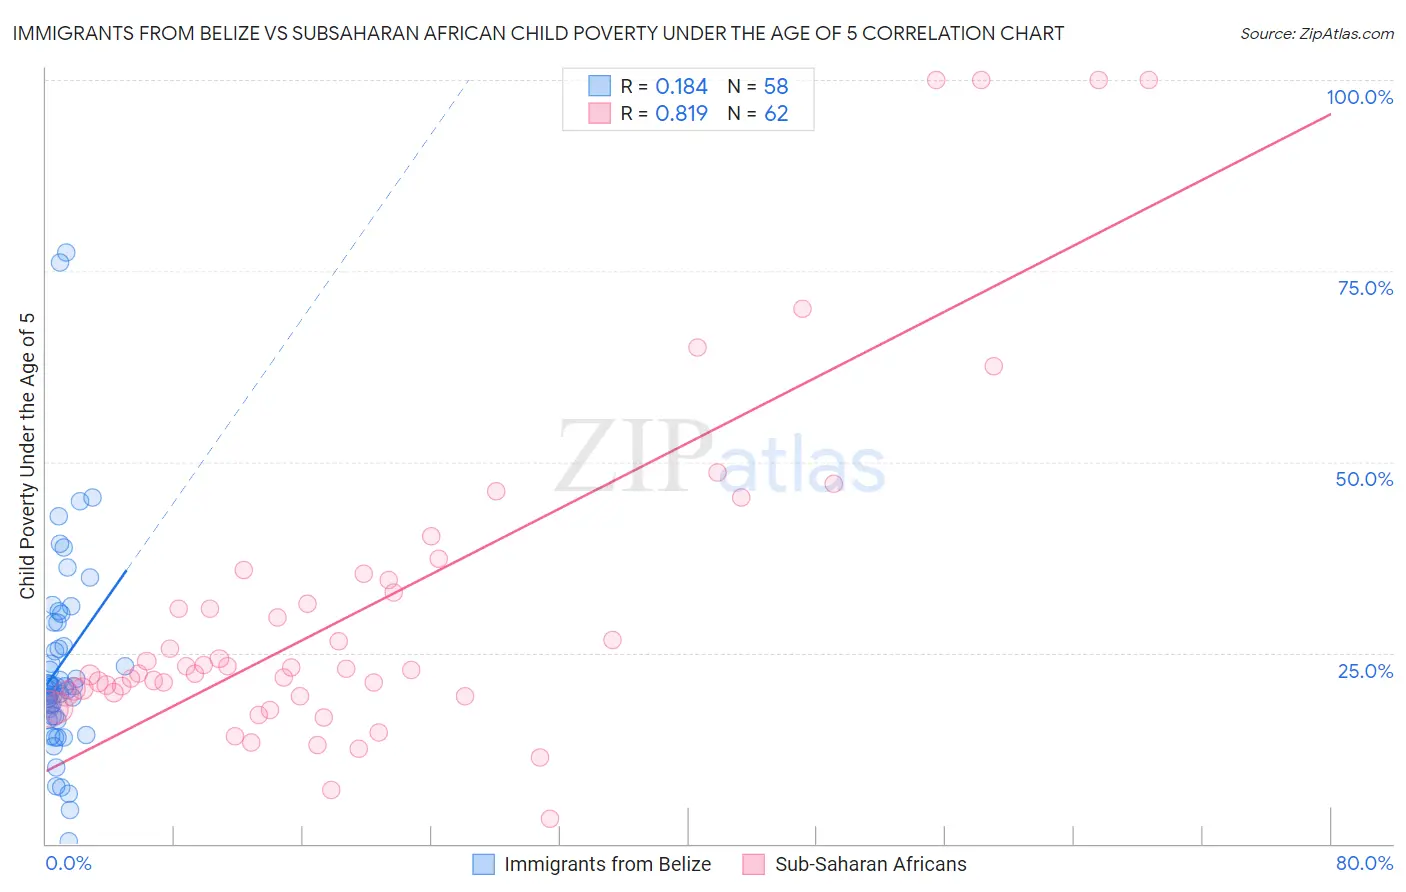 Immigrants from Belize vs Subsaharan African Child Poverty Under the Age of 5